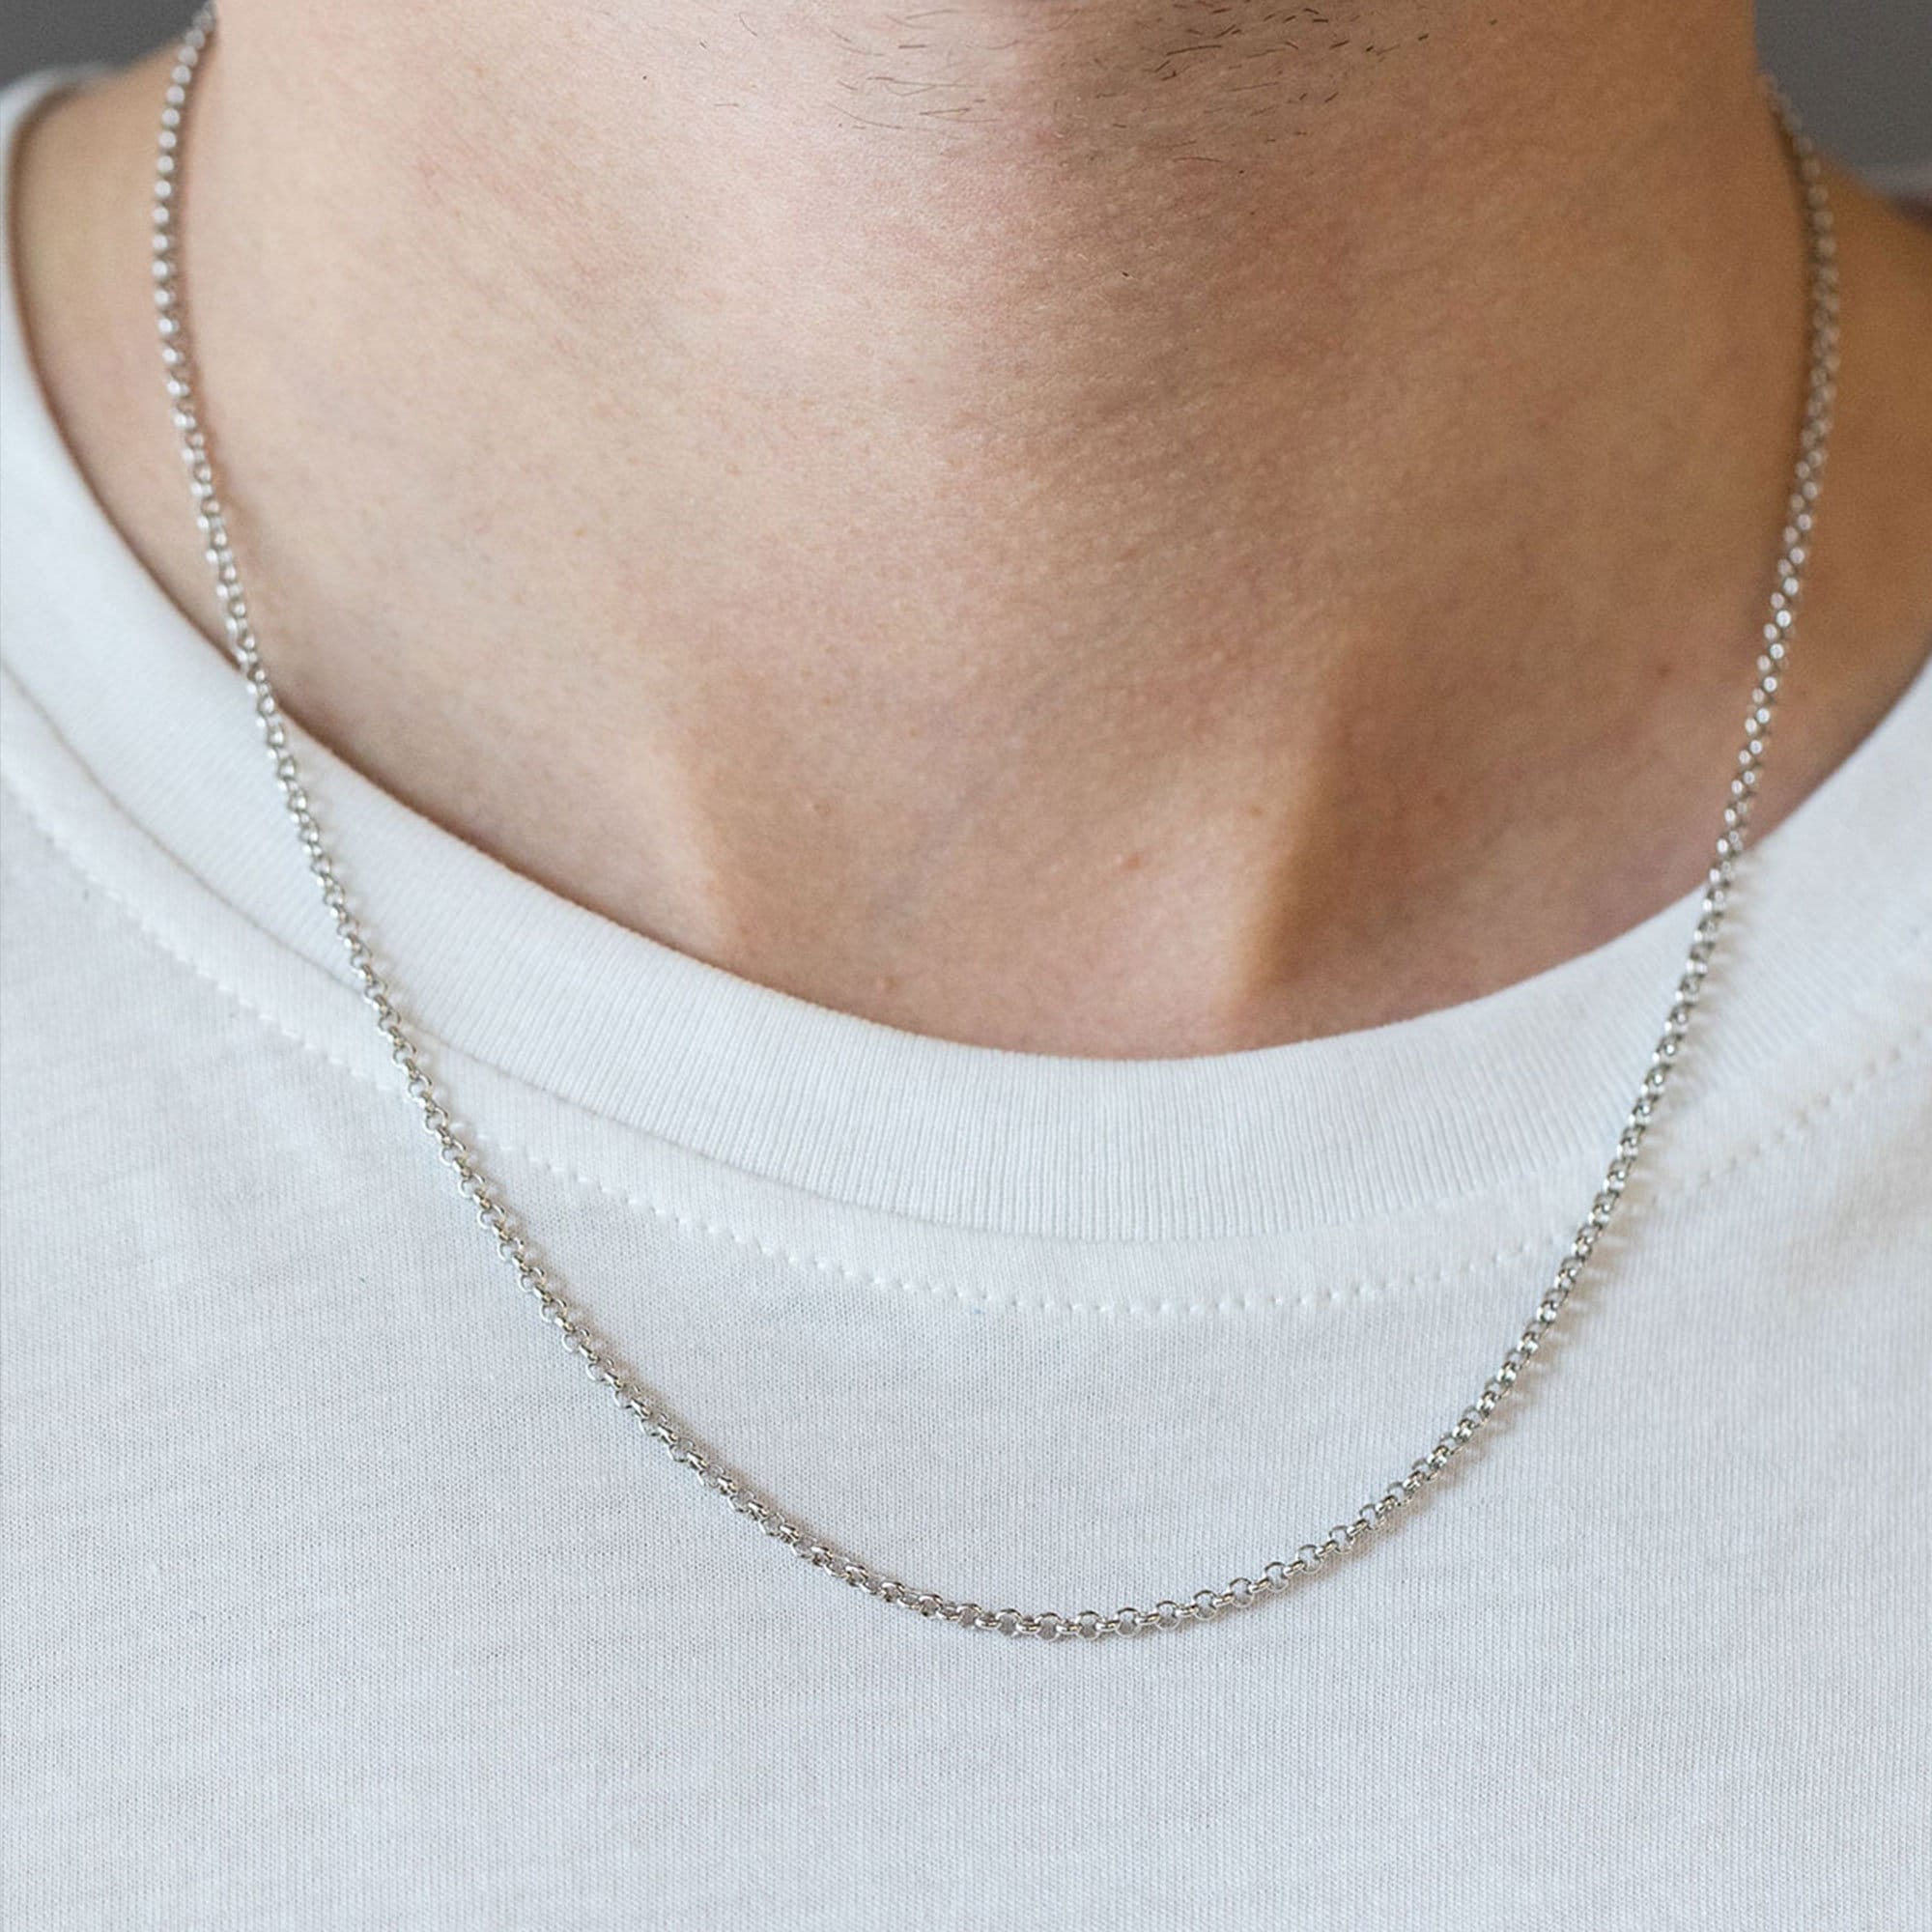 Buy Round Box Chain, Box Chain Necklace for Men, White Gold Box Chain, Box  Chain 14k Gold Necklace Chain, Box Chain Gold Necklace Chain Online in  India - Etsy